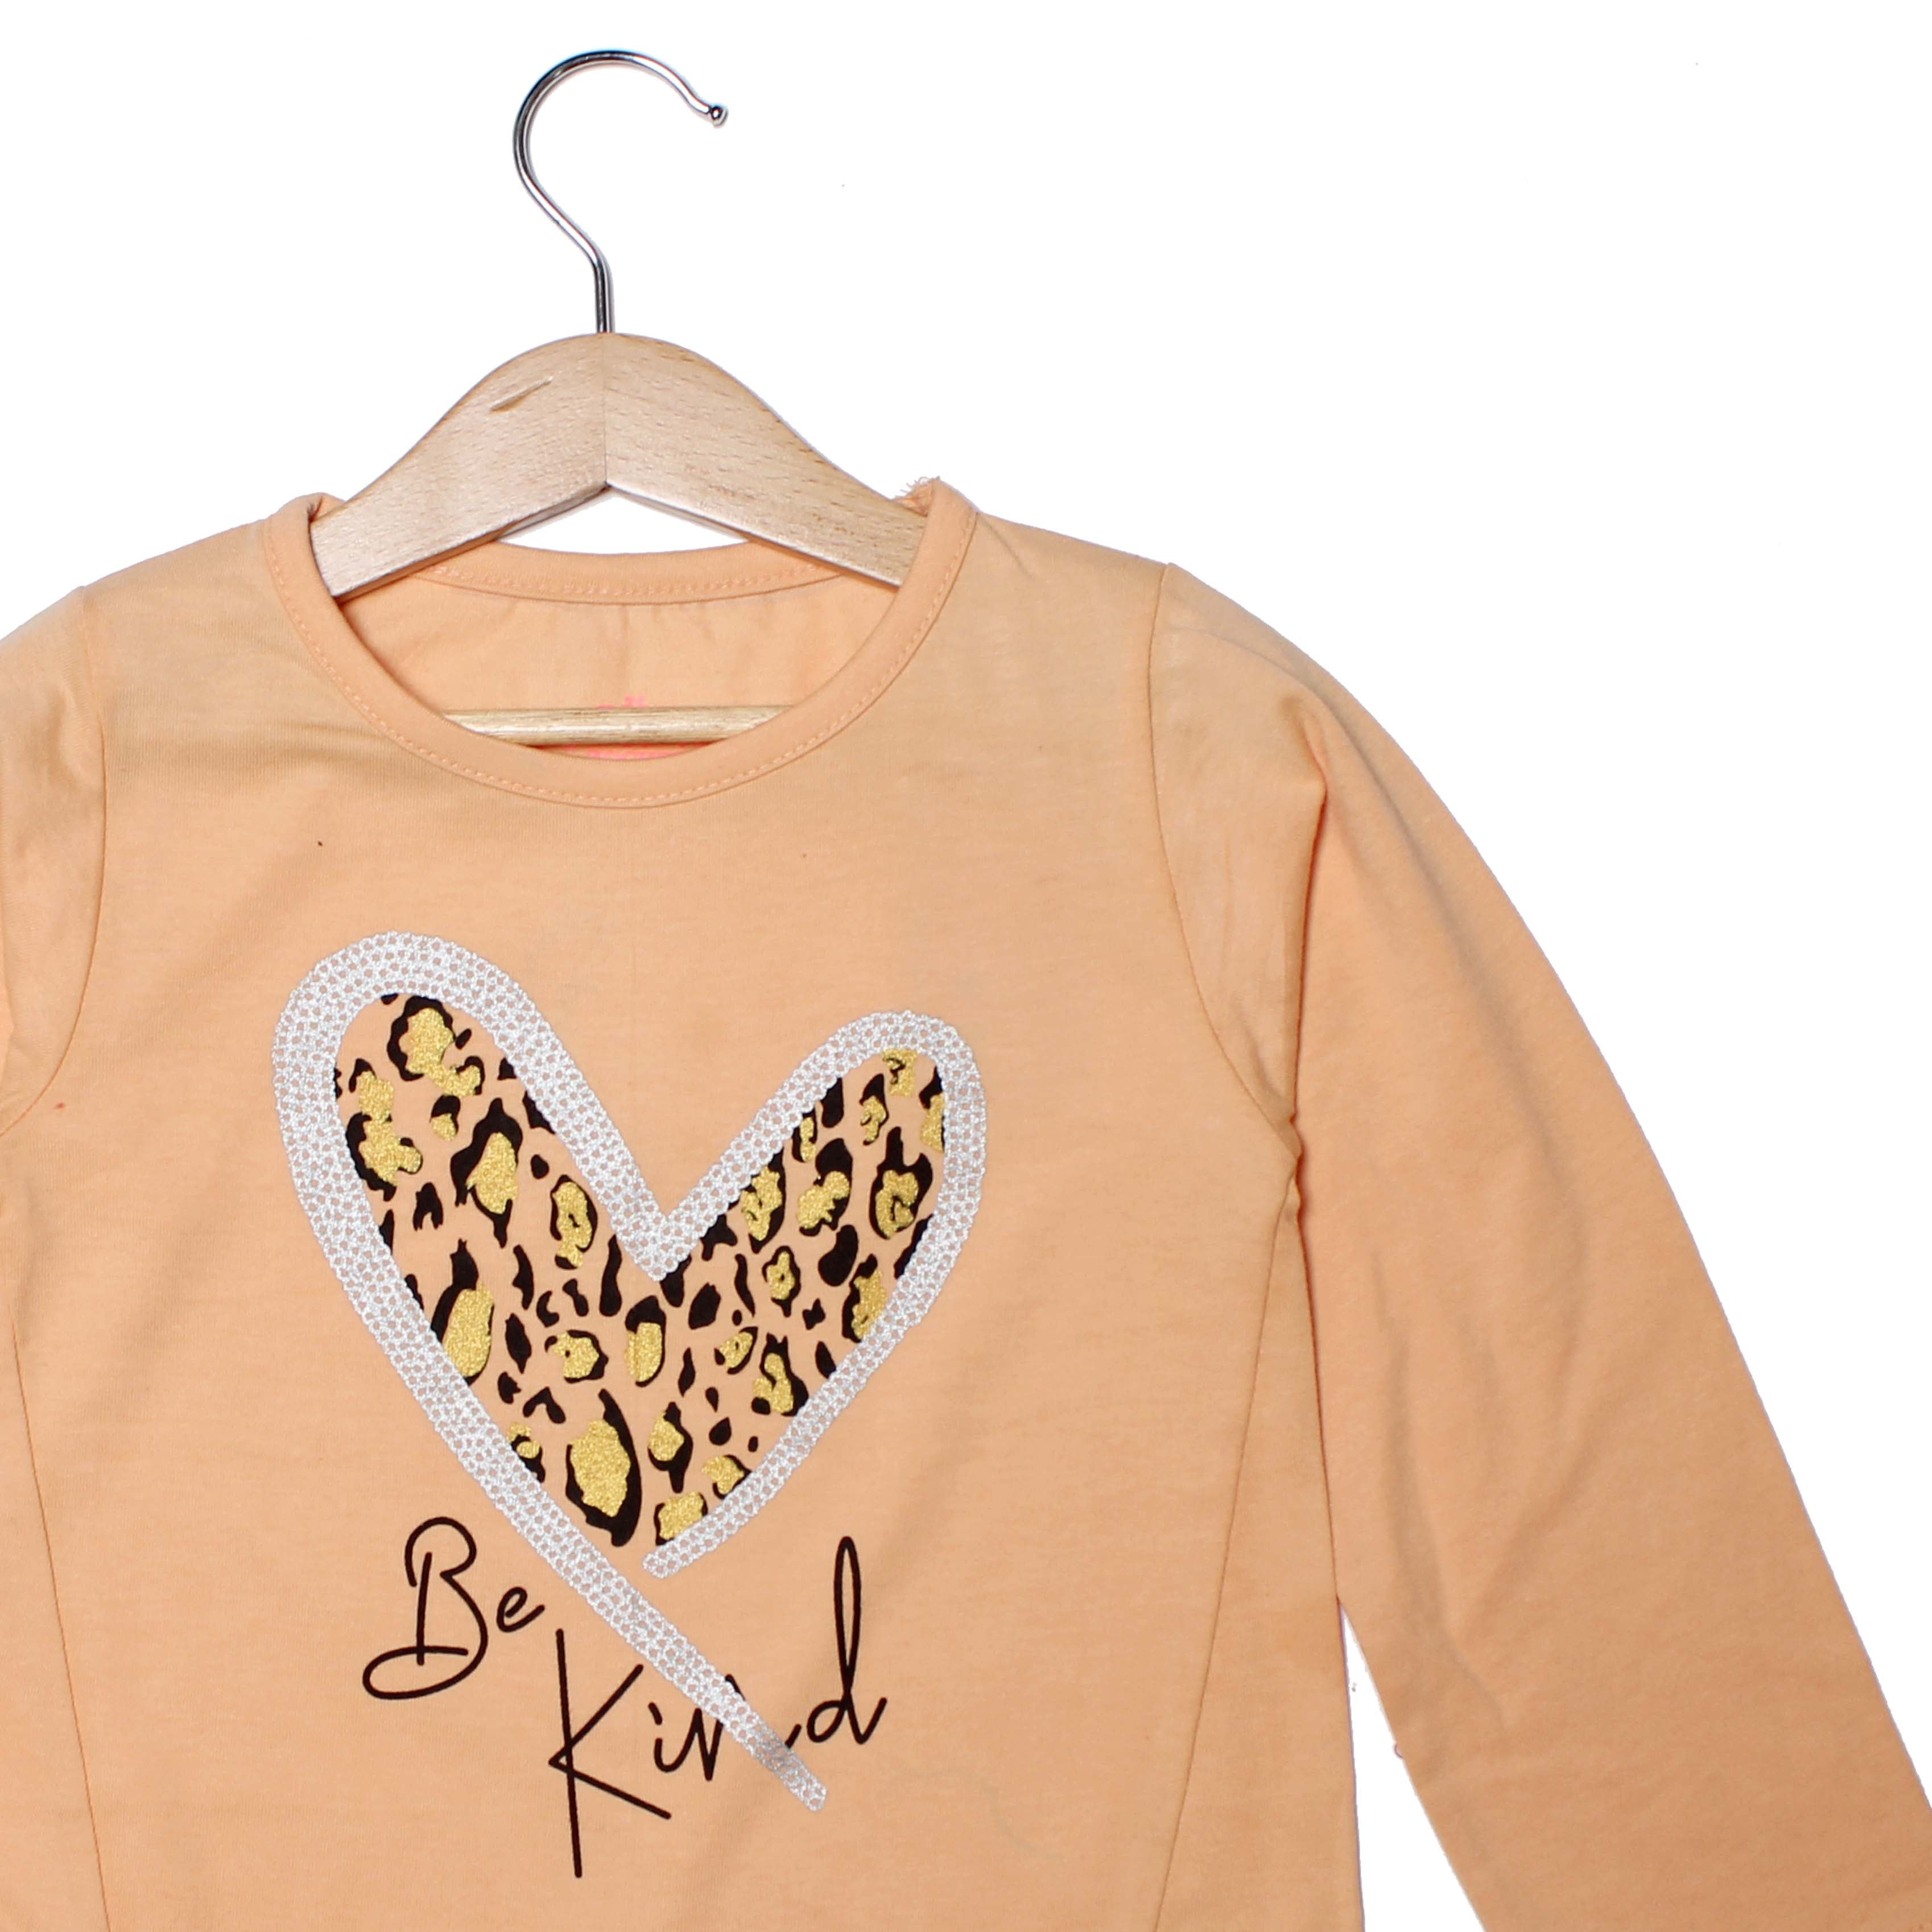 NEW PEACH HEART BE KIND PRINTED T-SHIRT TOP FOR GIRLS